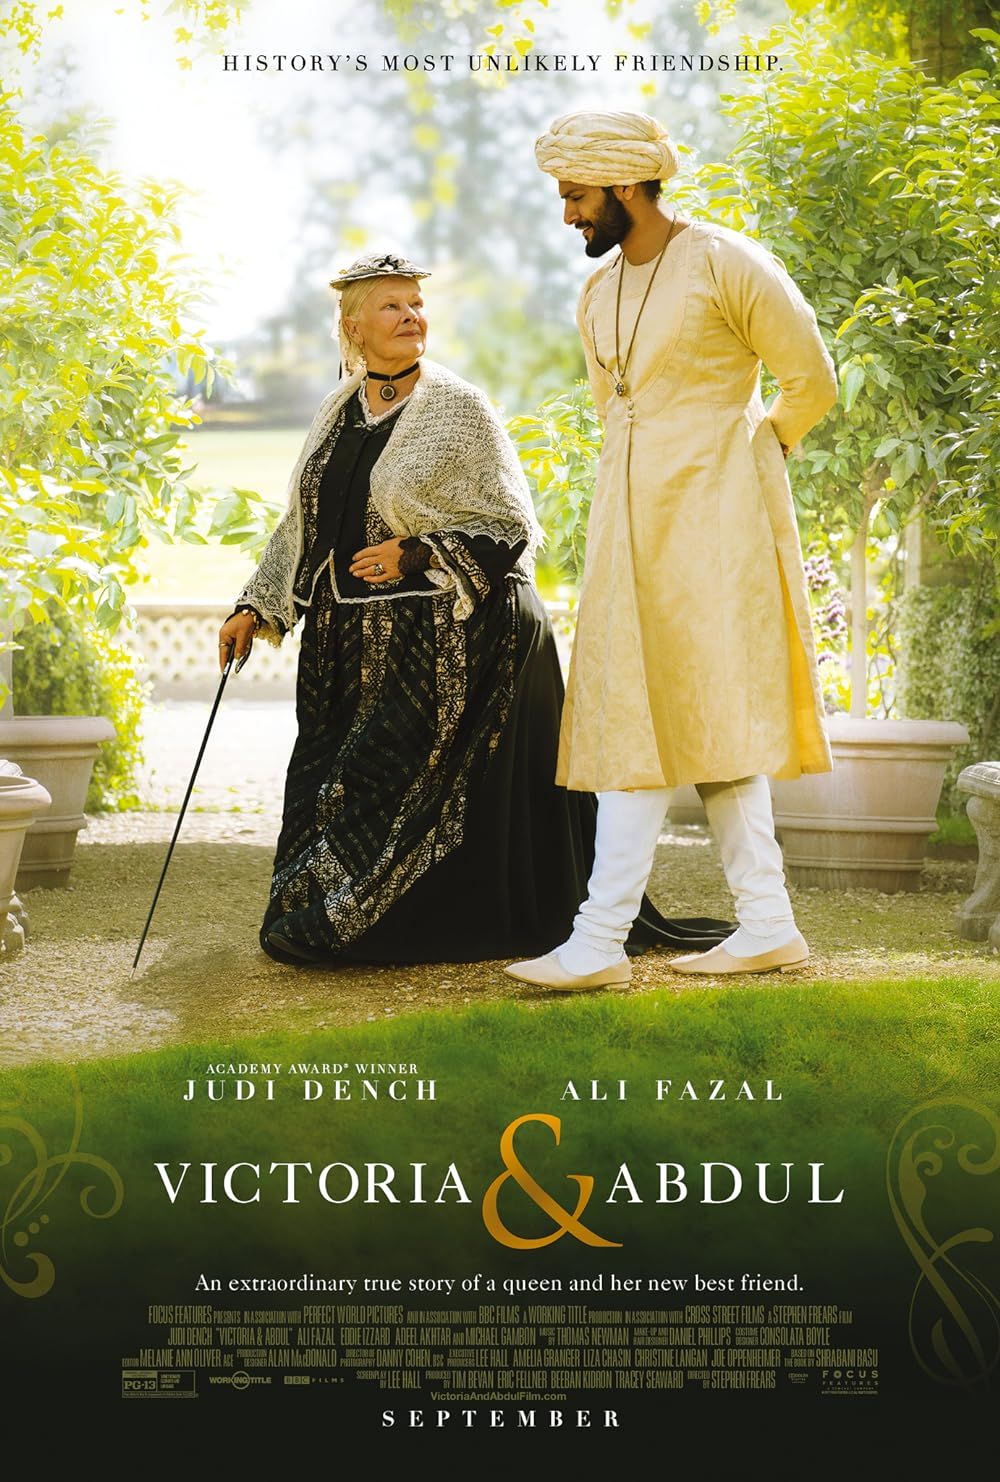 Judi Dench and Ali Fazal walk together on the poster for Victoria and Abdul